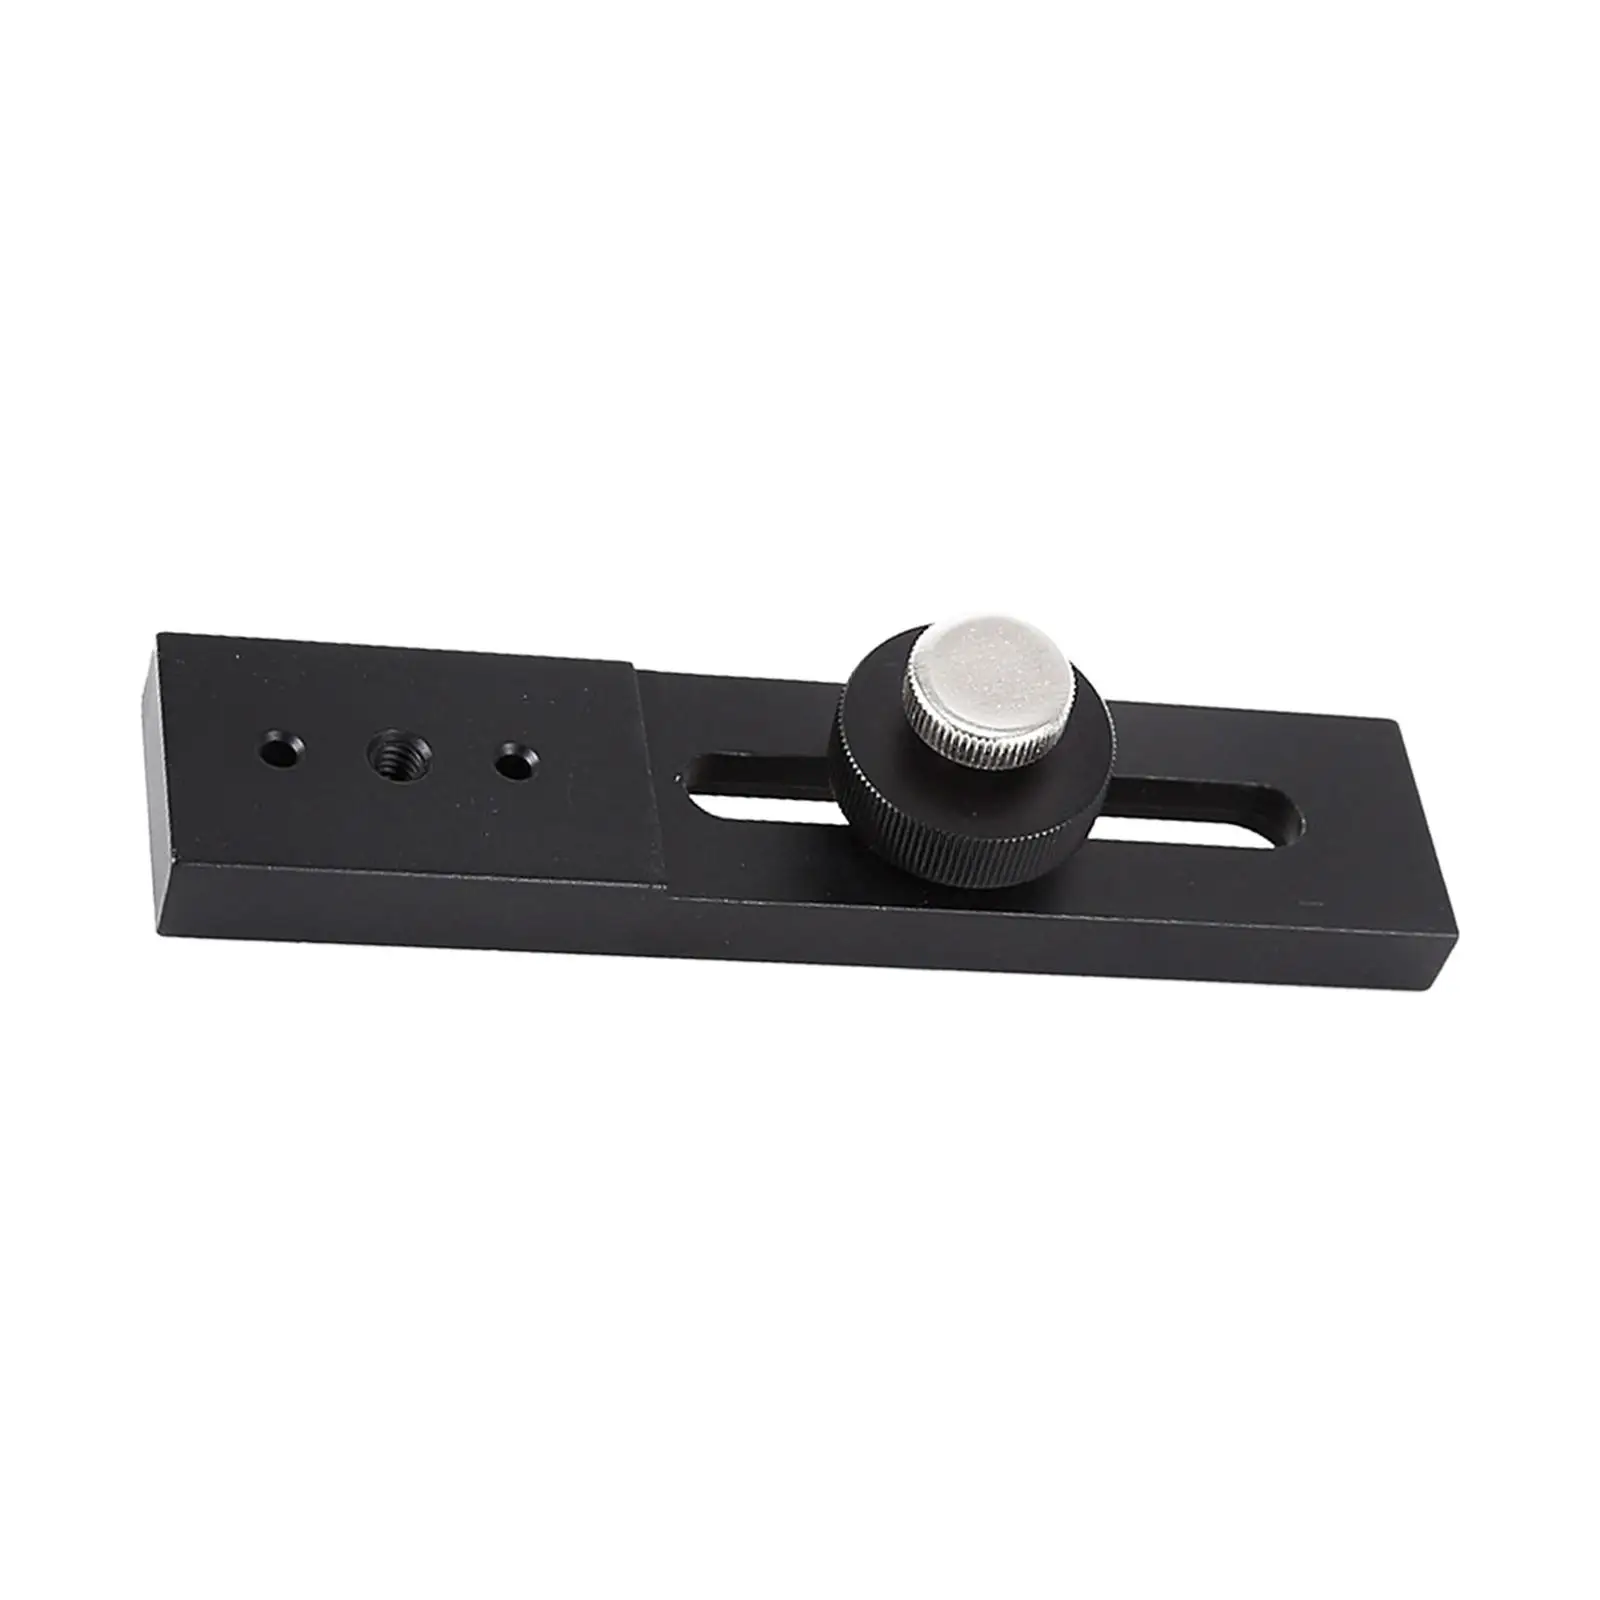 Dovetail Mount Plate Adapter Accessory for Binocular Finder Scope Telescope